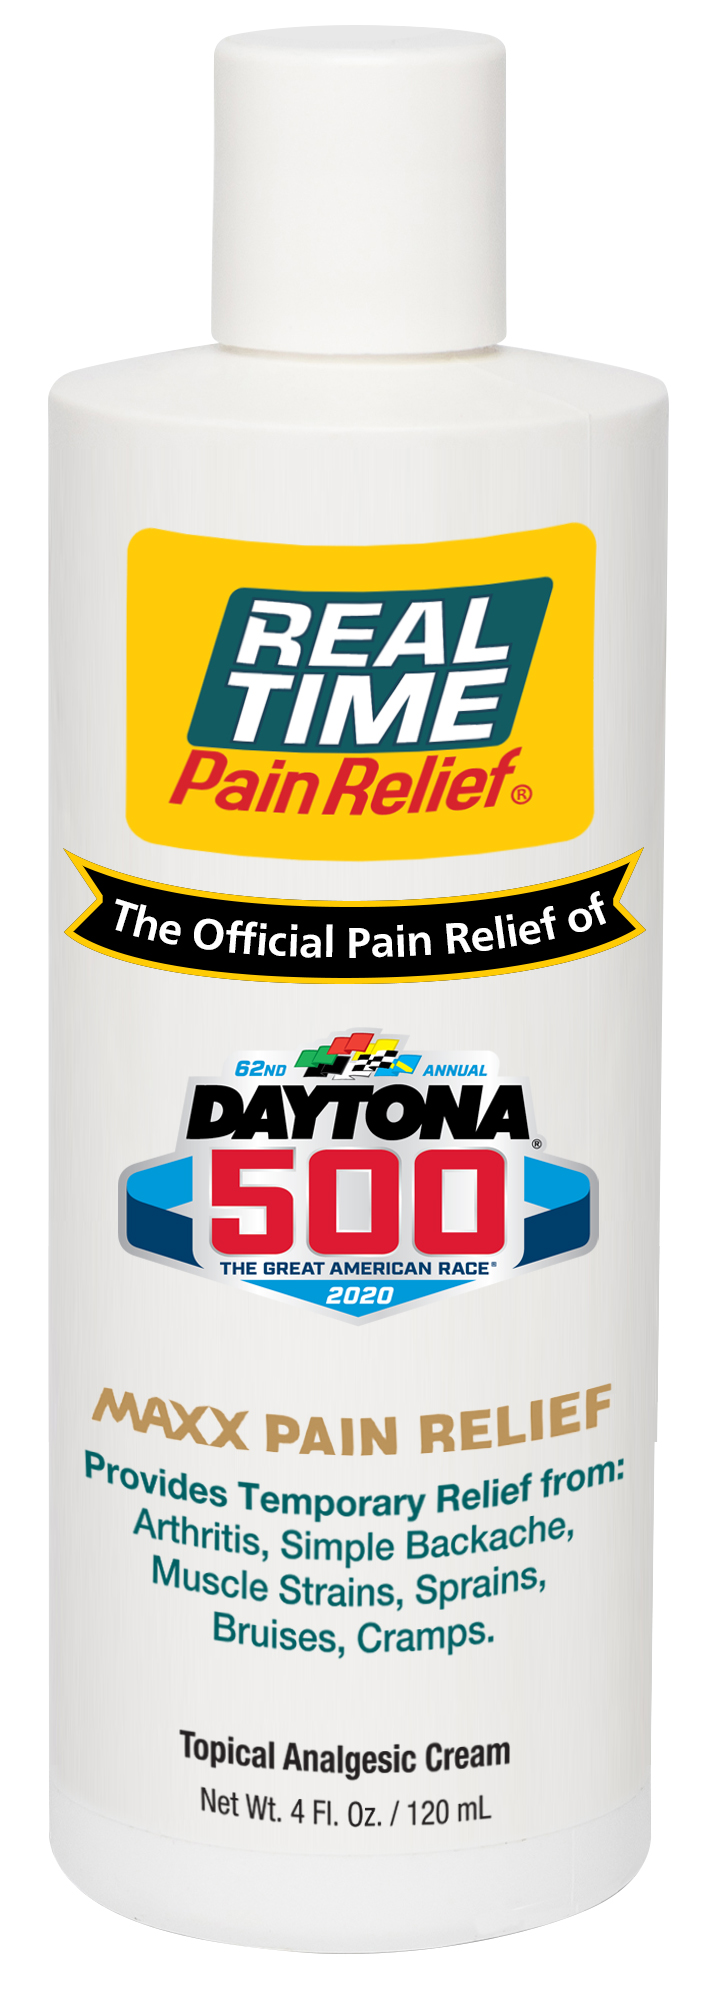 The DAYTONA 500 and the Daytona International Speedway logos will be featured on the front of their respective limited edition 4 oz bottles of Real Time Pain Relief’s MAXX Pain Relief Cream.